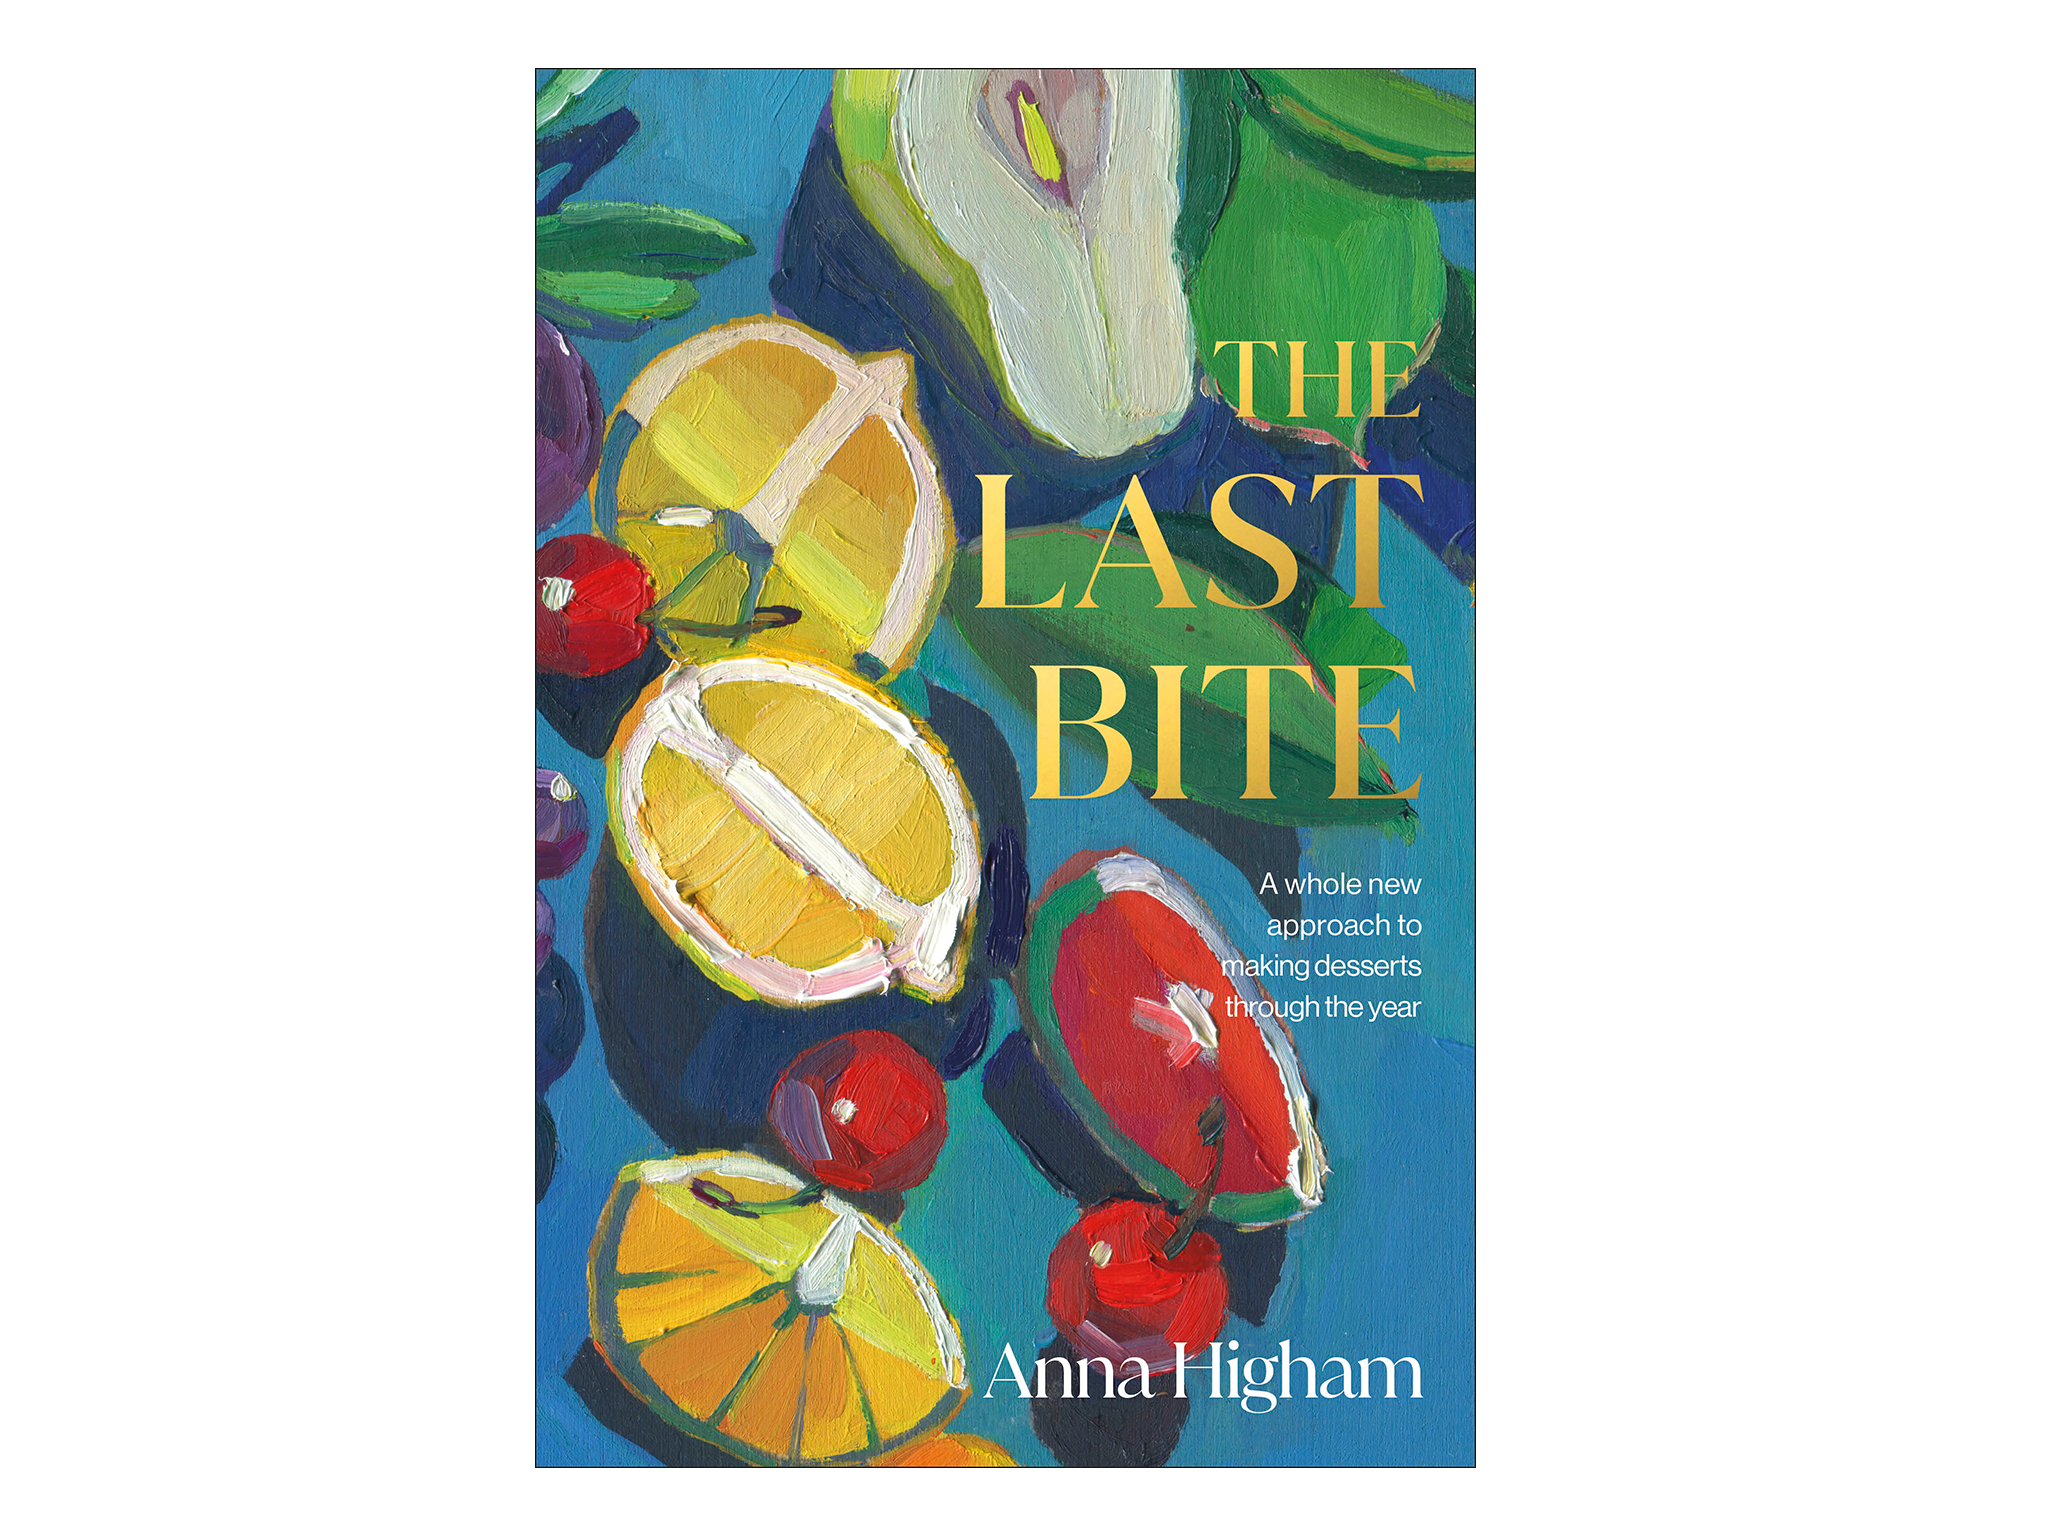 ‘The Last Bite’ by Anna Higham, published by DK